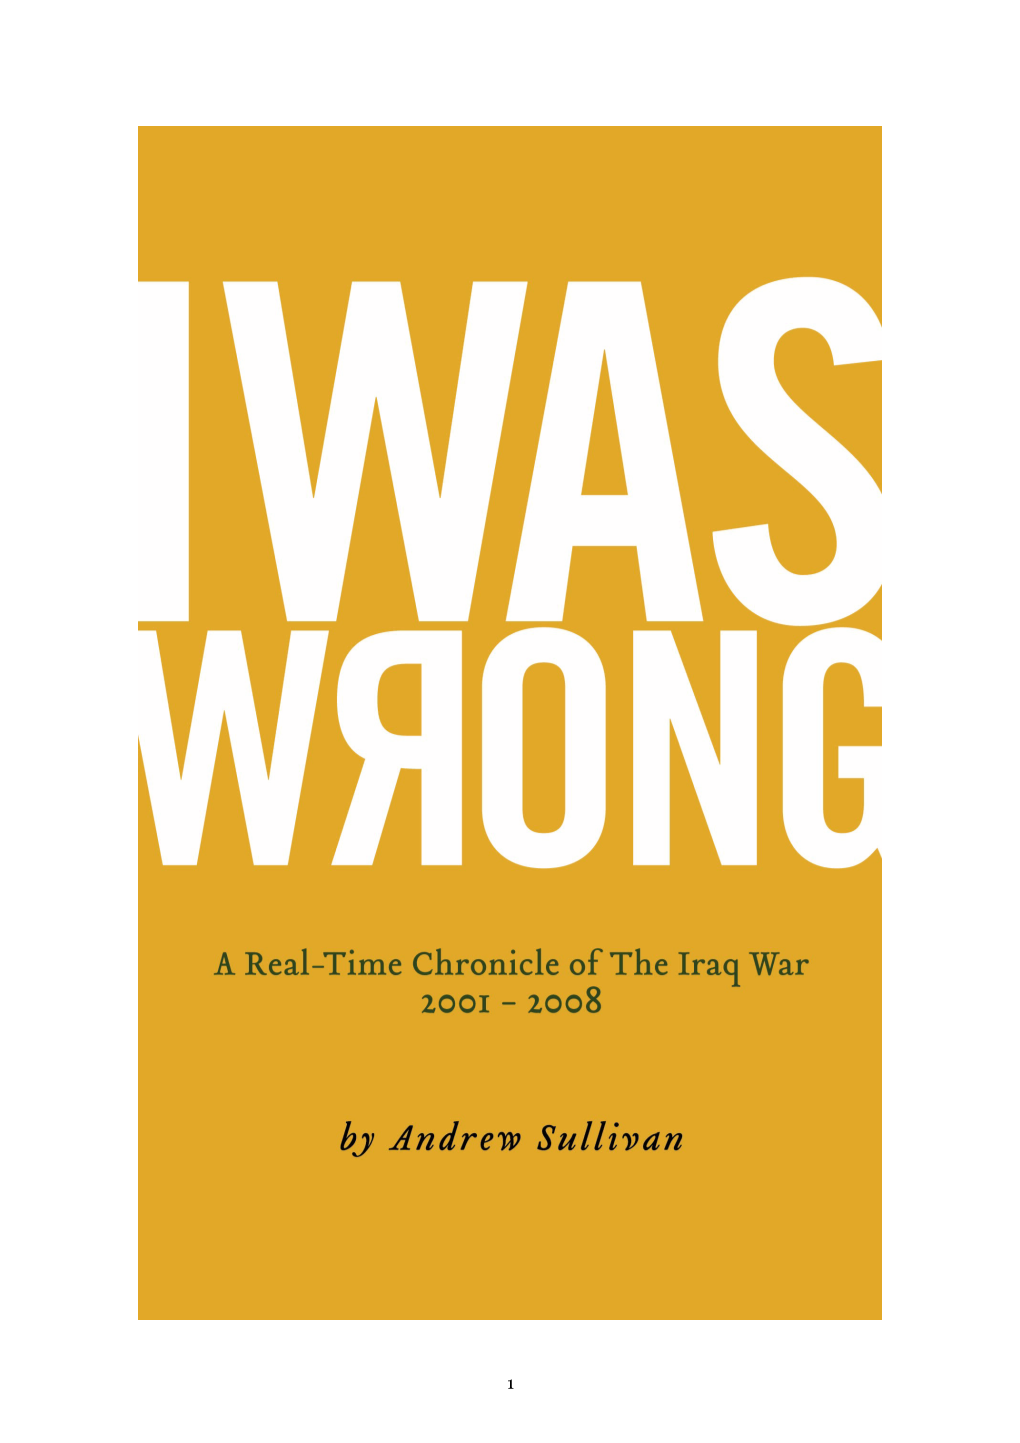 I Was Wrong Reflects the Whole, Unvarnished Truth